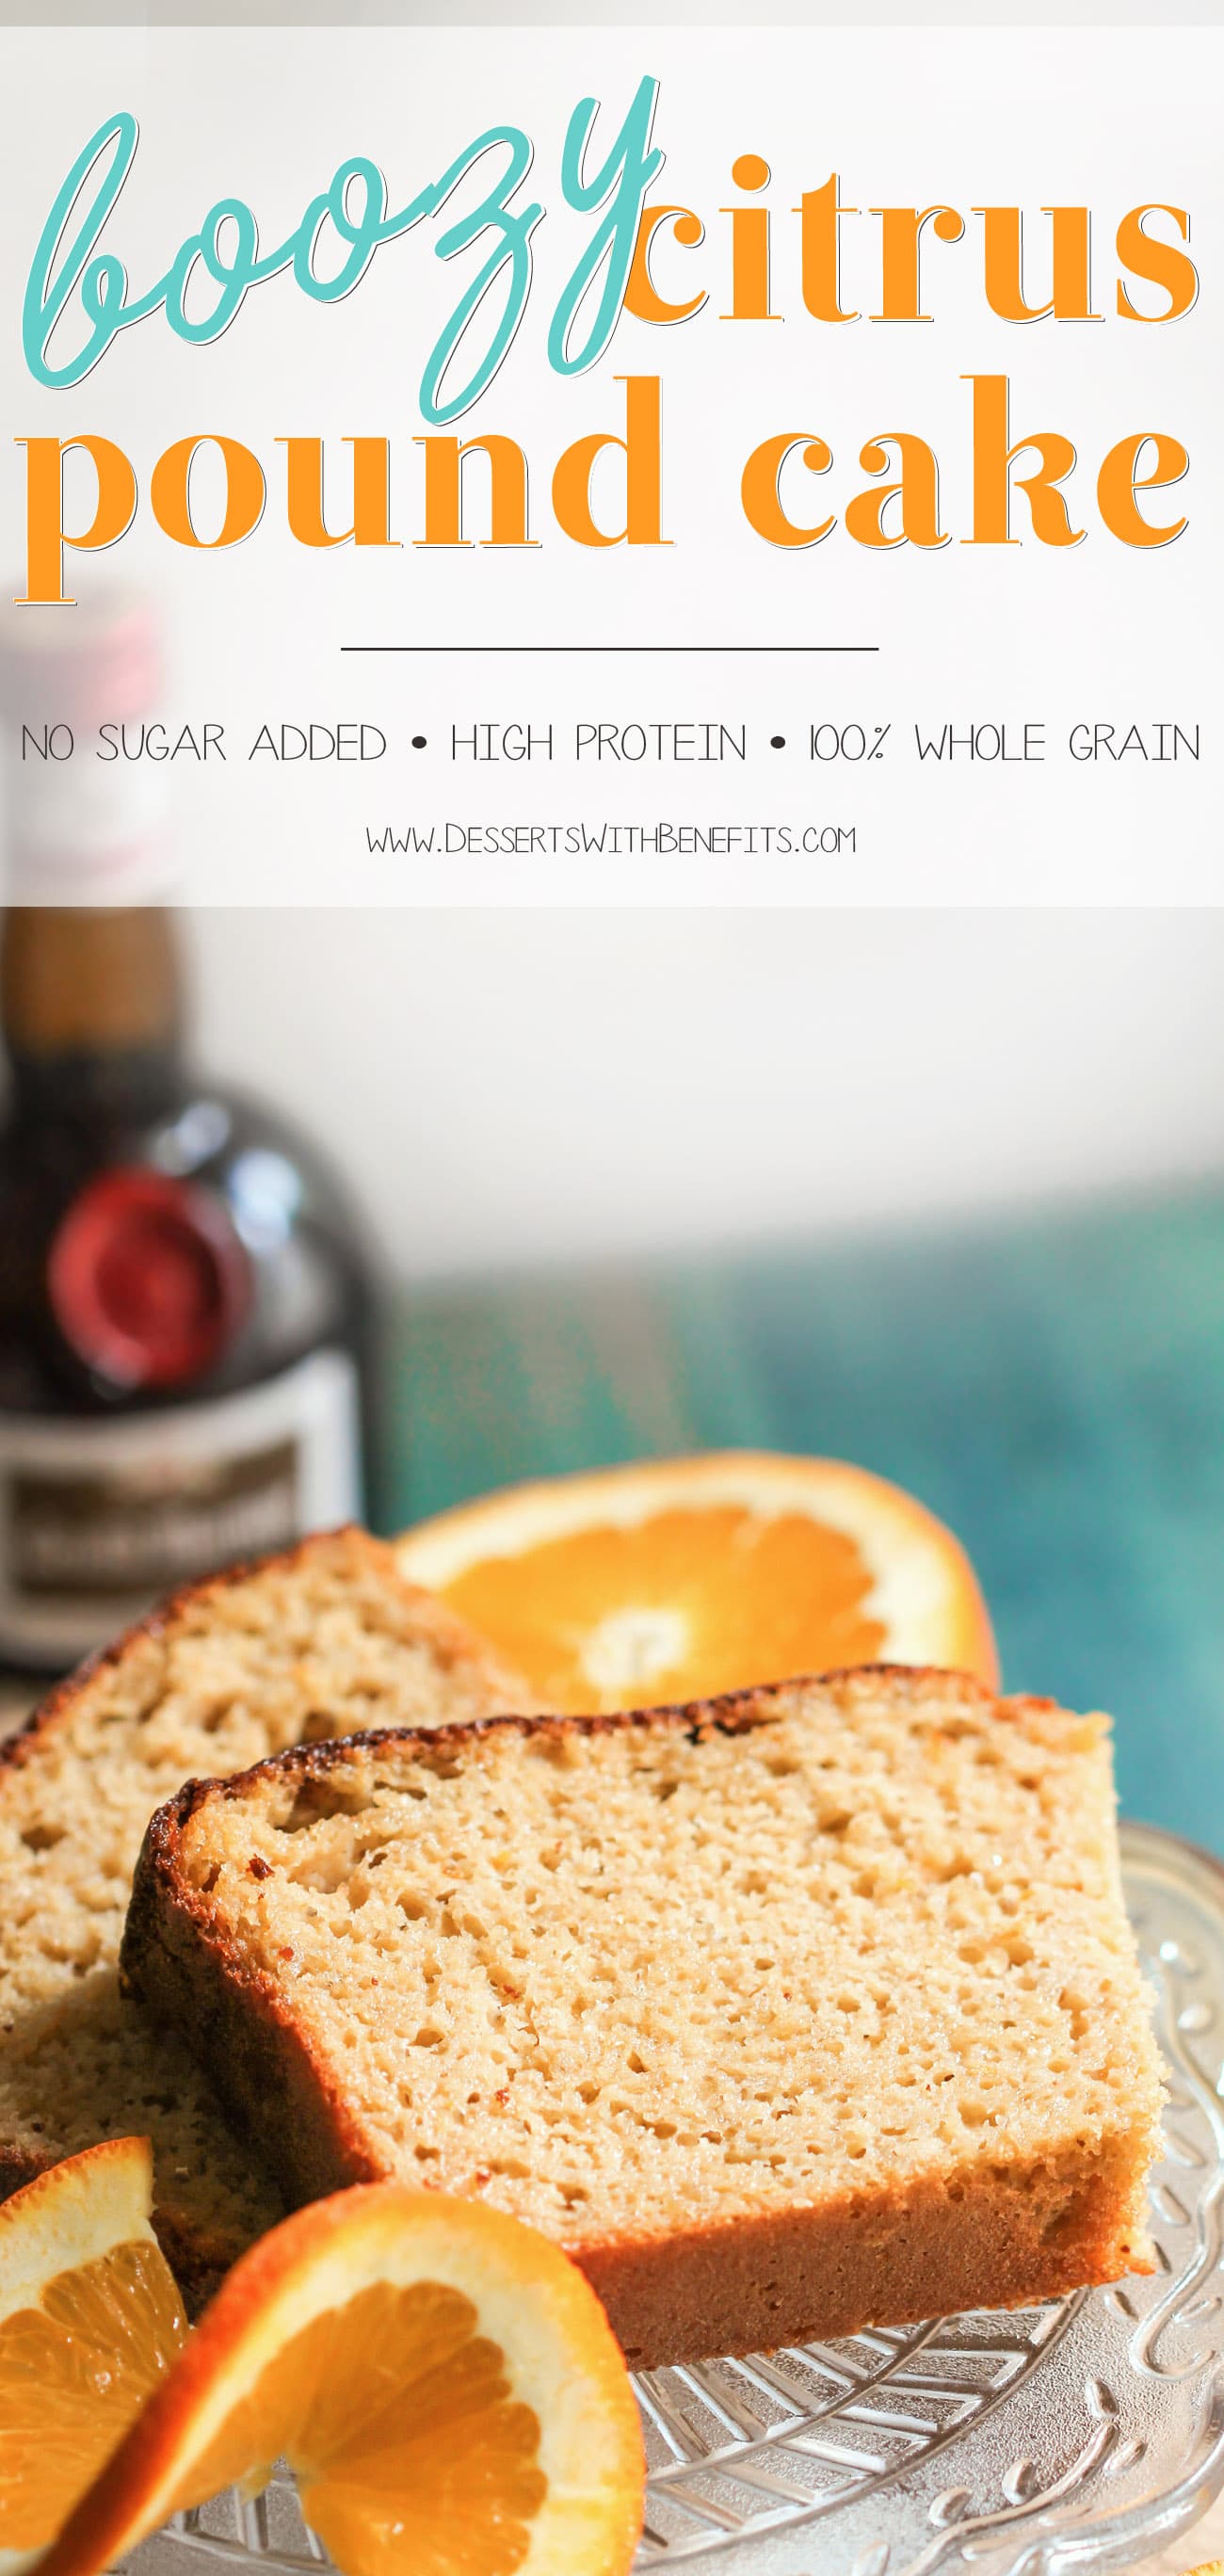 This Healthy BOOZY Orange Pound Cake is sweet, buttery, and full of refreshing orange flavor. You'd never know it's low sugar, high protein, and whole grain, and you’d DEFINITELY never guess that it’s made without butter! Healthy Dessert Recipes with sugar free, low calorie, low fat, low carb, high protein, gluten free, dairy free, vegan, and raw options at the Desserts With Benefits Blog (www.DessertsWithBenefits.com)